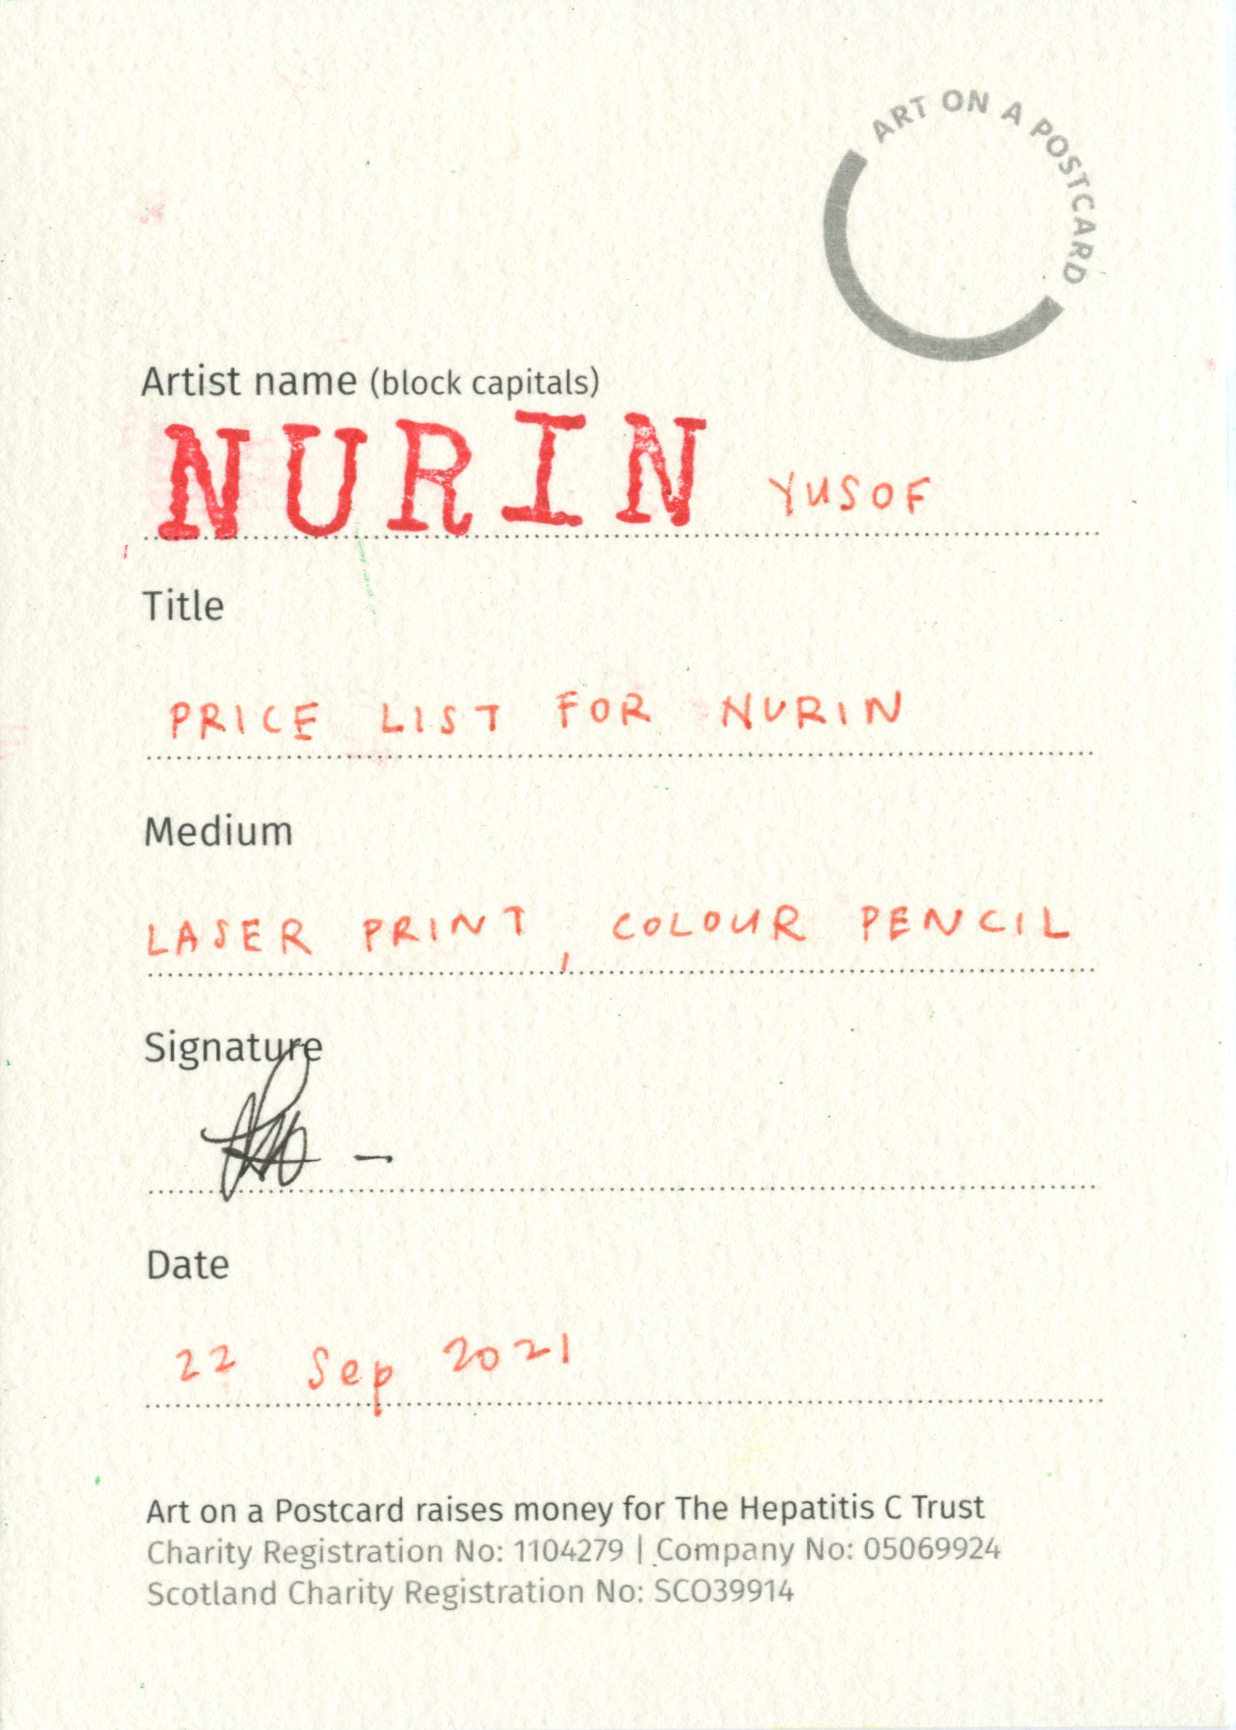 PRICE LIST FOR NURIN - back